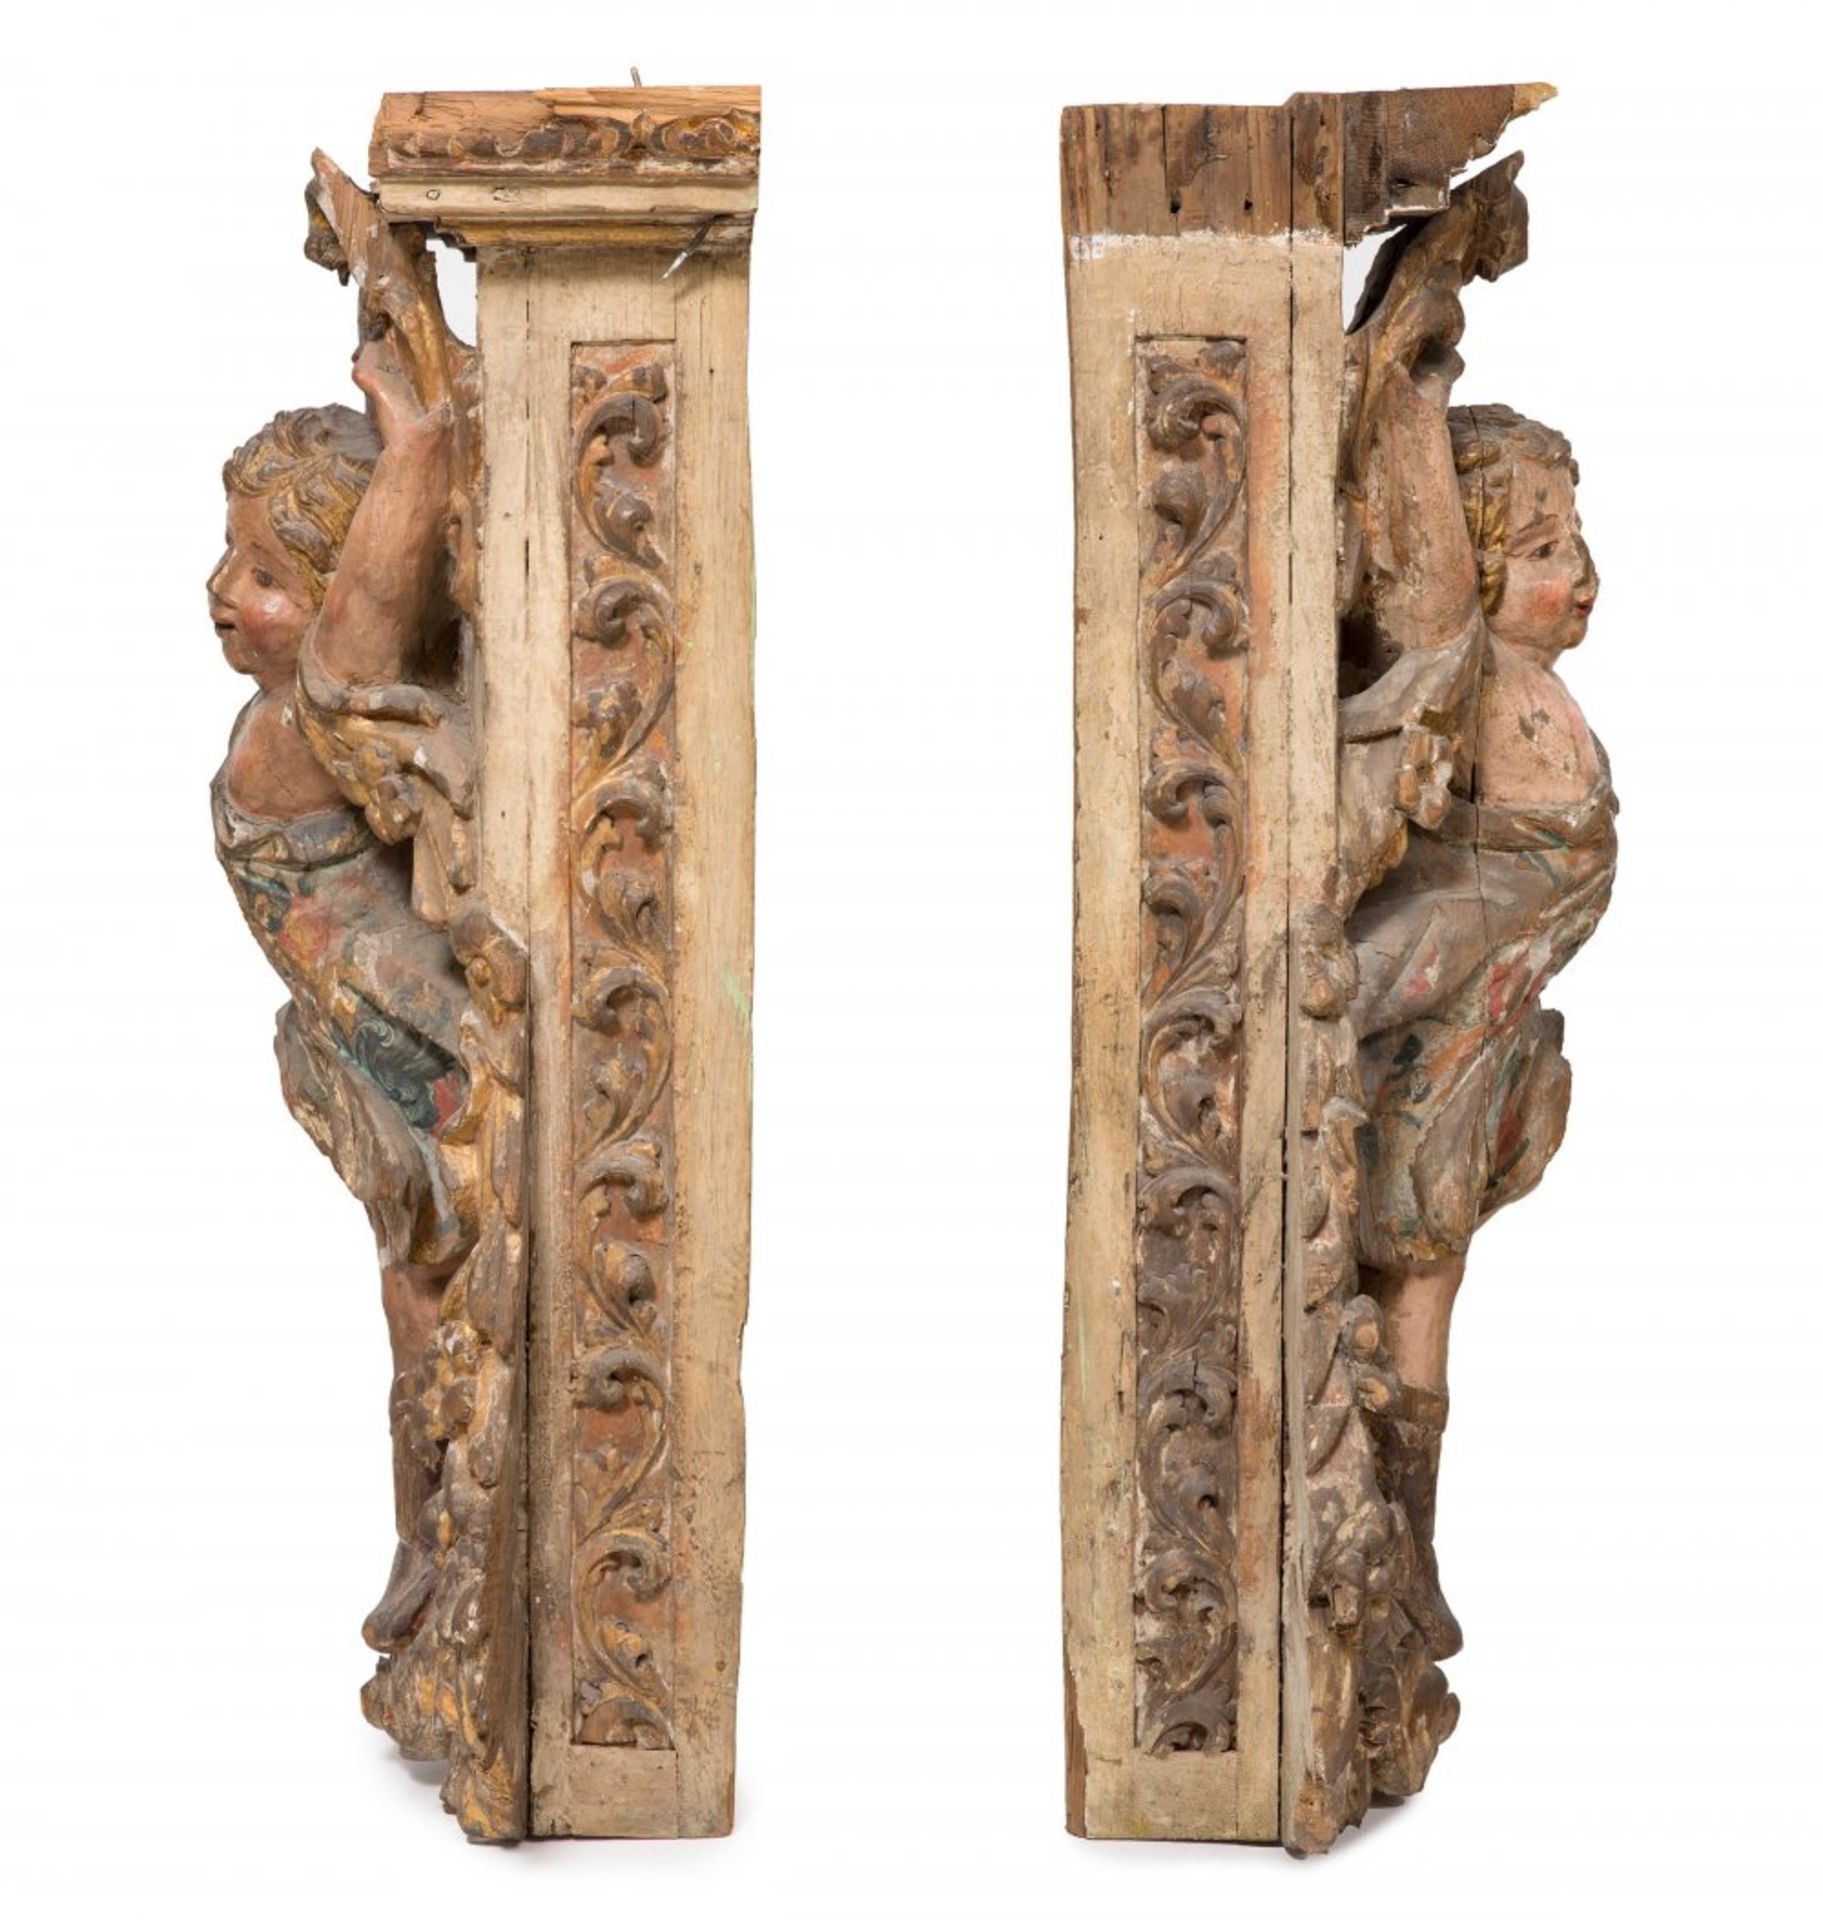 Early 18th century Spanish work.Pair of pilasters with angels.Carved, gilded and polychrome wood. - Image 4 of 6